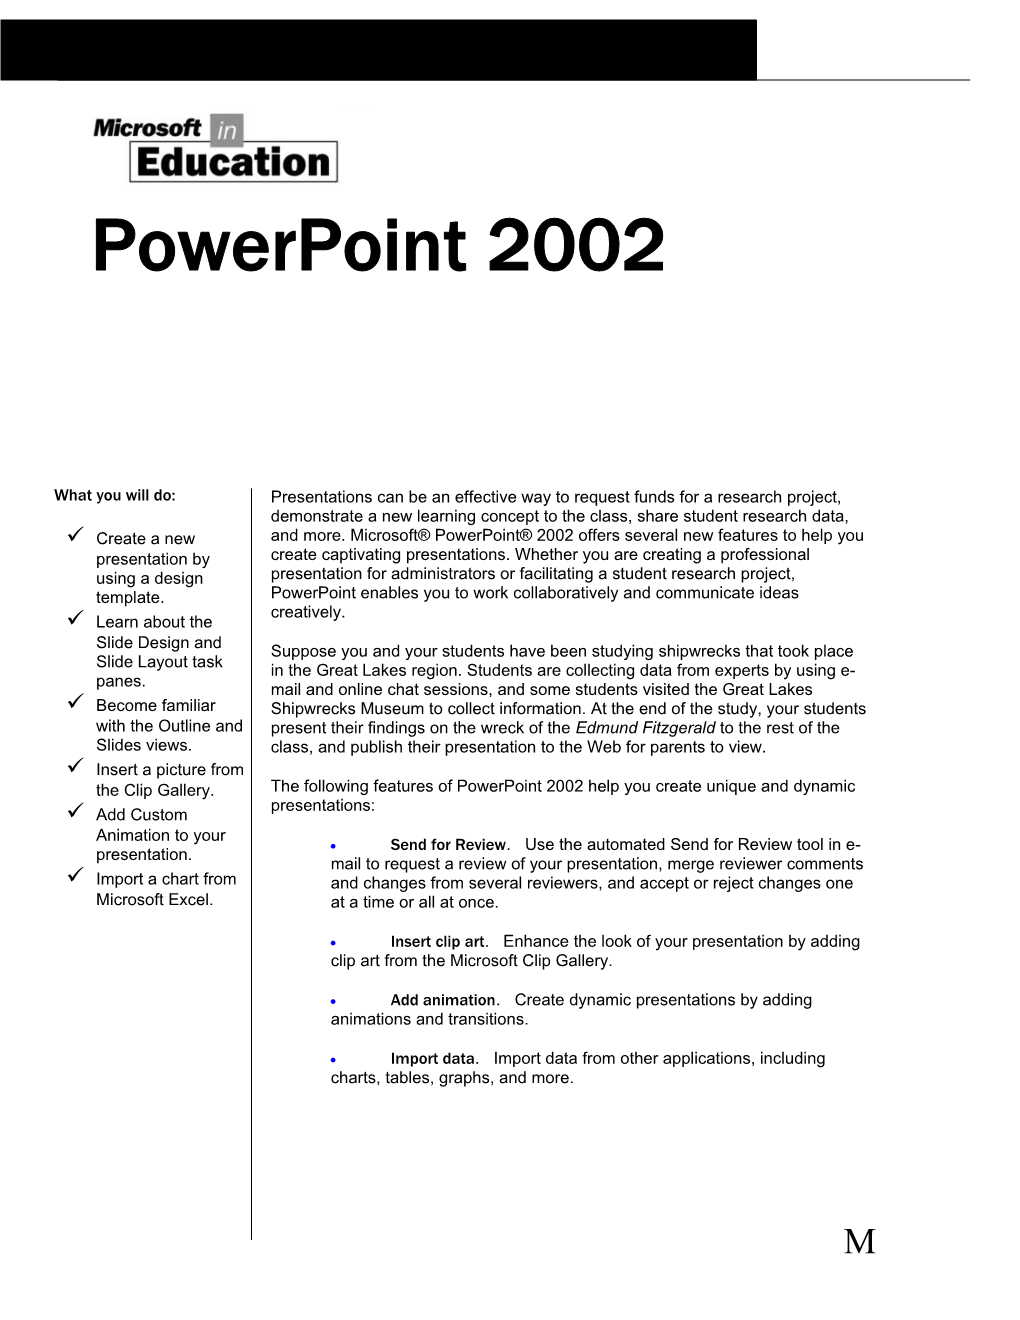 The Following Features of Powerpoint 2002 Help You Create Unique and Dynamic Presentations